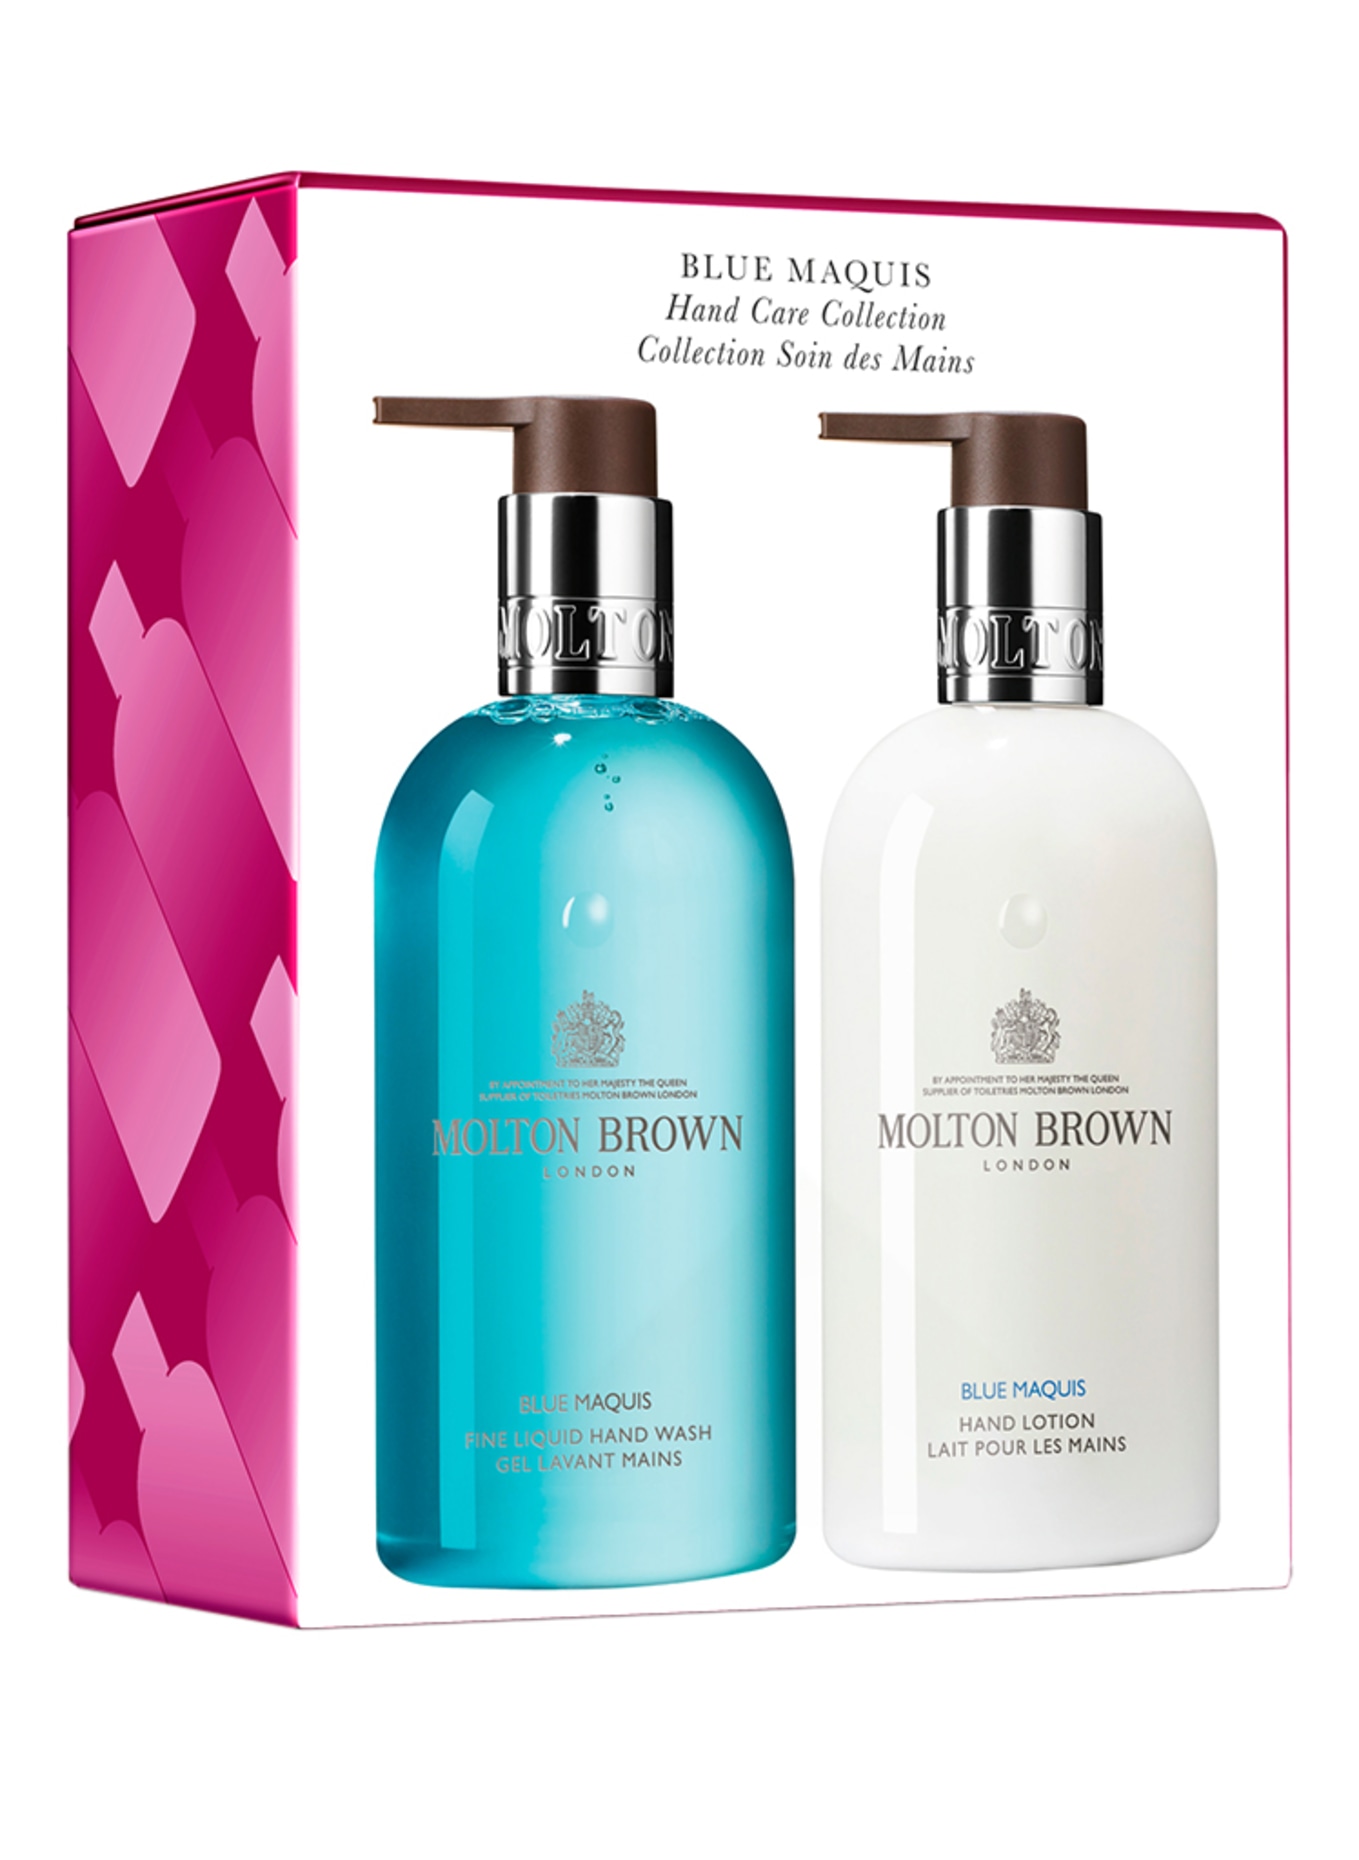 MOLTON BROWN BLUE MAQUIS HAND CARE COLLECTION (Obrázek 1)